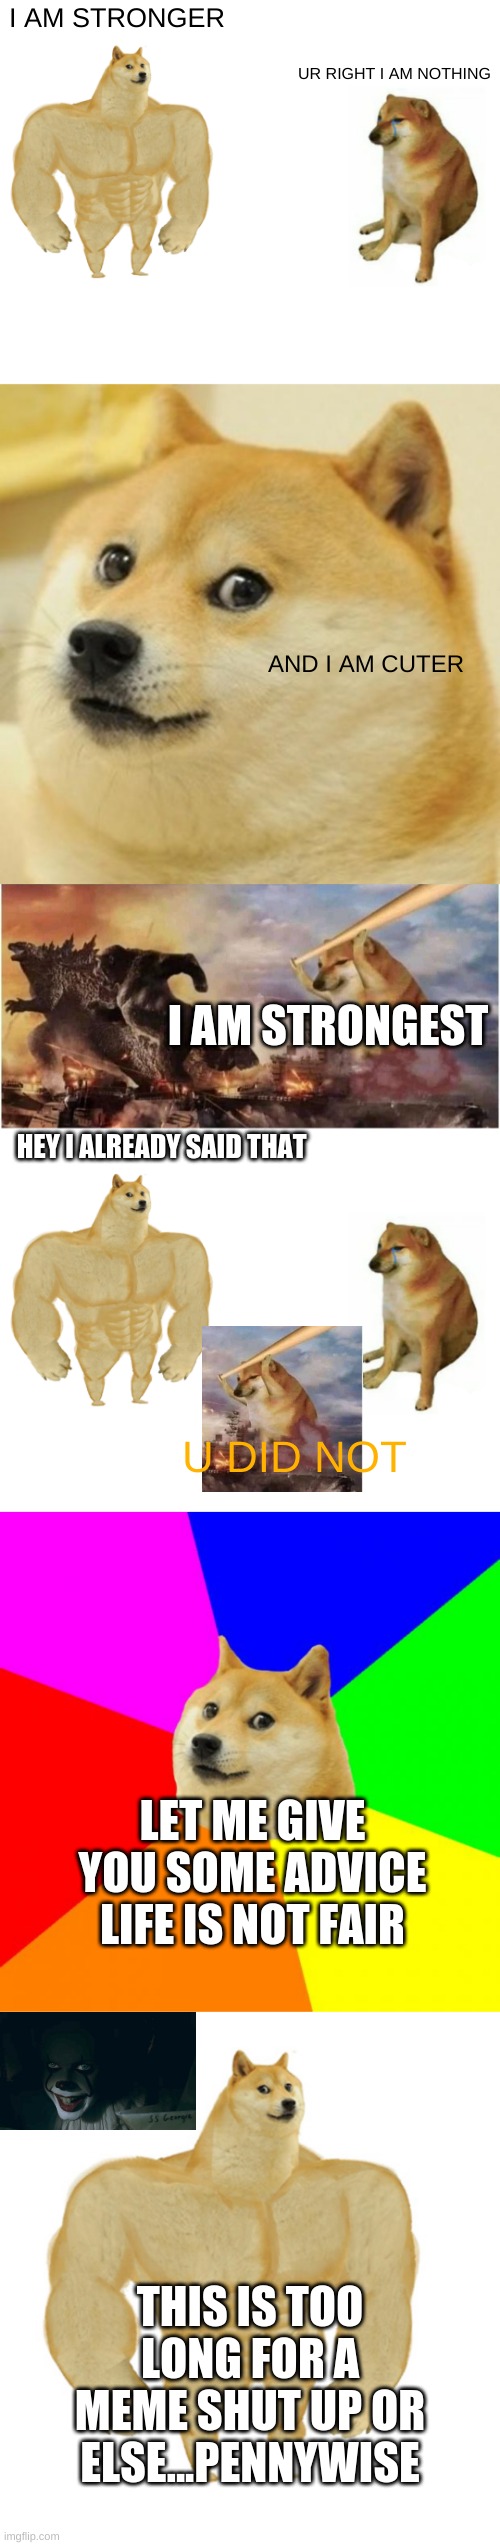 Dumb arguing be like | I AM STRONGER; UR RIGHT I AM NOTHING; AND I AM CUTER; I AM STRONGEST; HEY I ALREADY SAID THAT; U DID NOT; LET ME GIVE YOU SOME ADVICE LIFE IS NOT FAIR; THIS IS TOO LONG FOR A MEME SHUT UP OR ELSE...PENNYWISE | image tagged in memes,buff doge vs cheems,doge,kong godzilla doge,advice doge,buff doge vs crying cheems | made w/ Imgflip meme maker